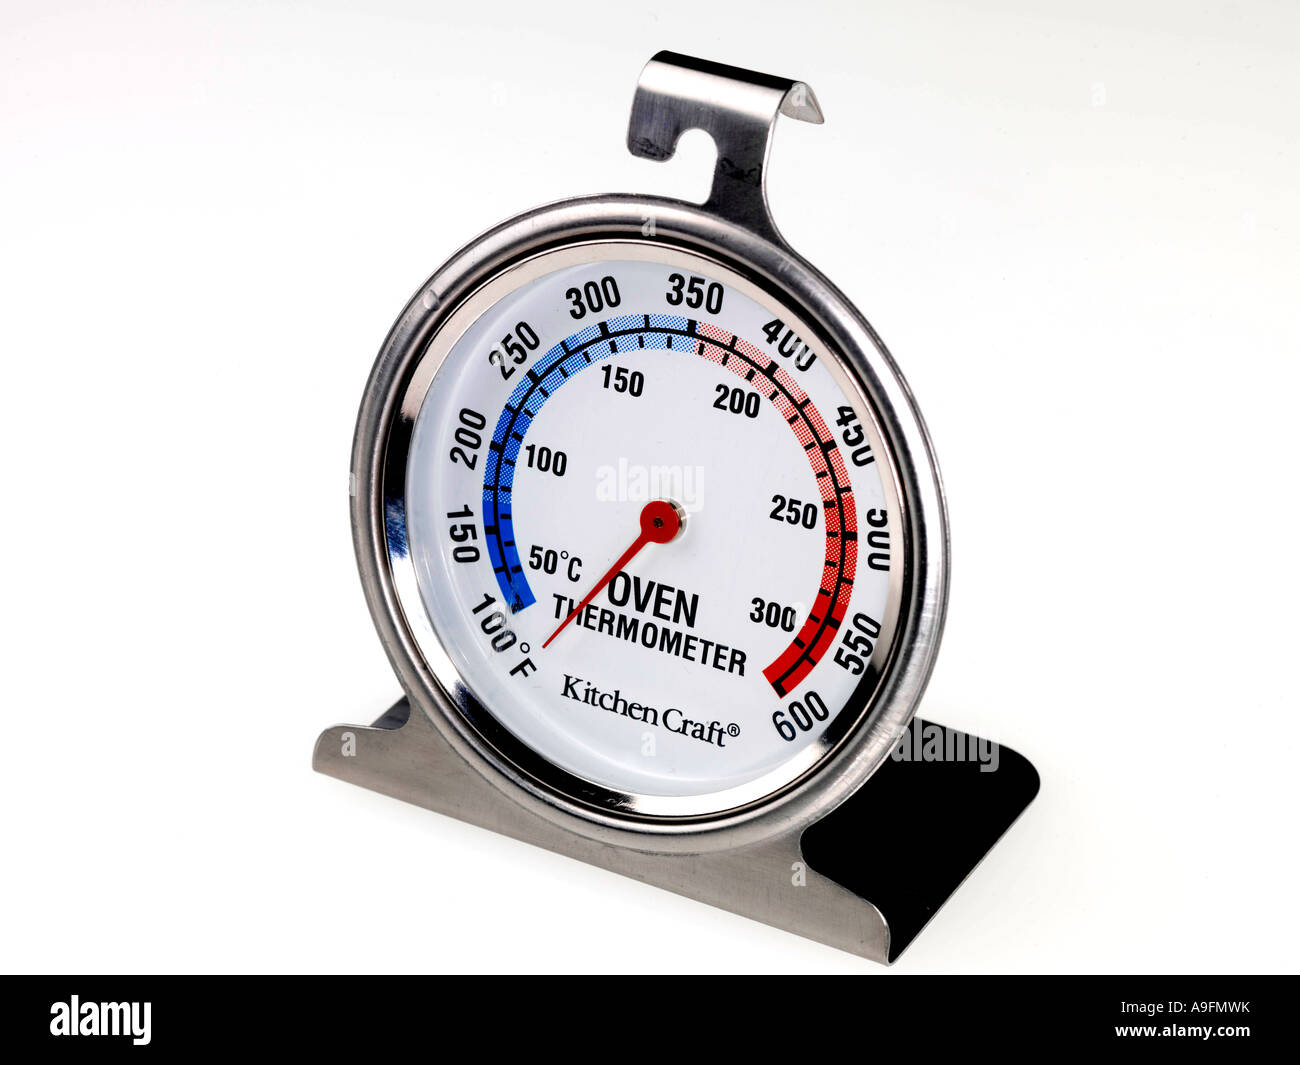 https://c8.alamy.com/comp/A9FMWK/oven-thermometer-A9FMWK.jpg